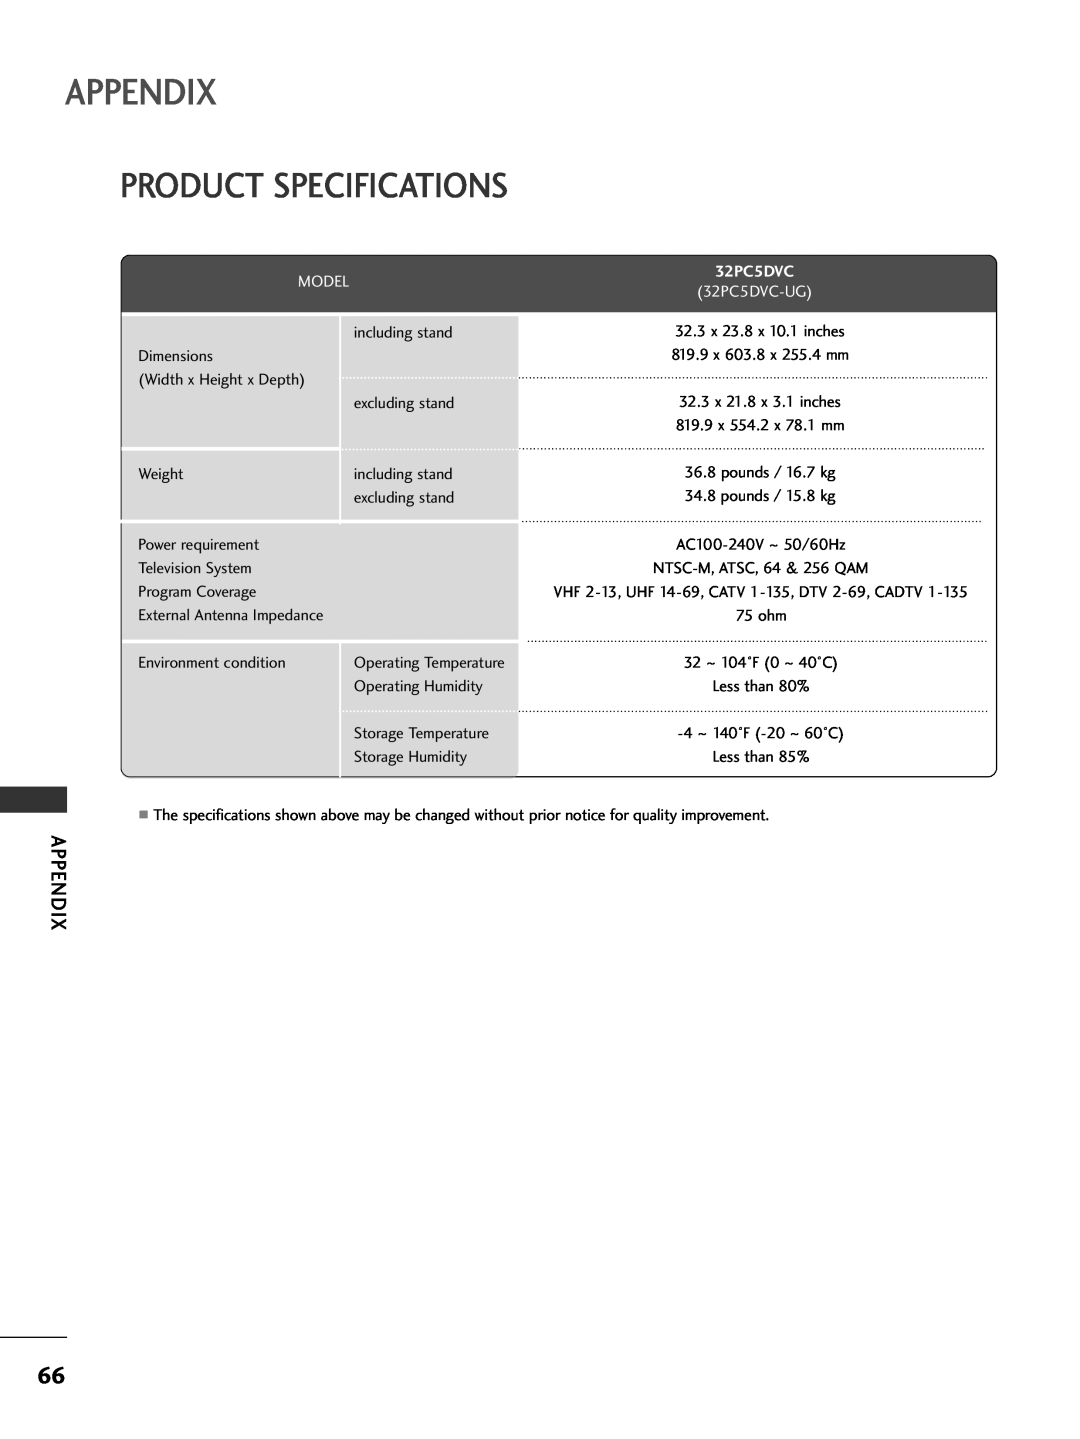 LG Electronics owner manual Product Specifications, Appendix, 32PC5DVC-UG 